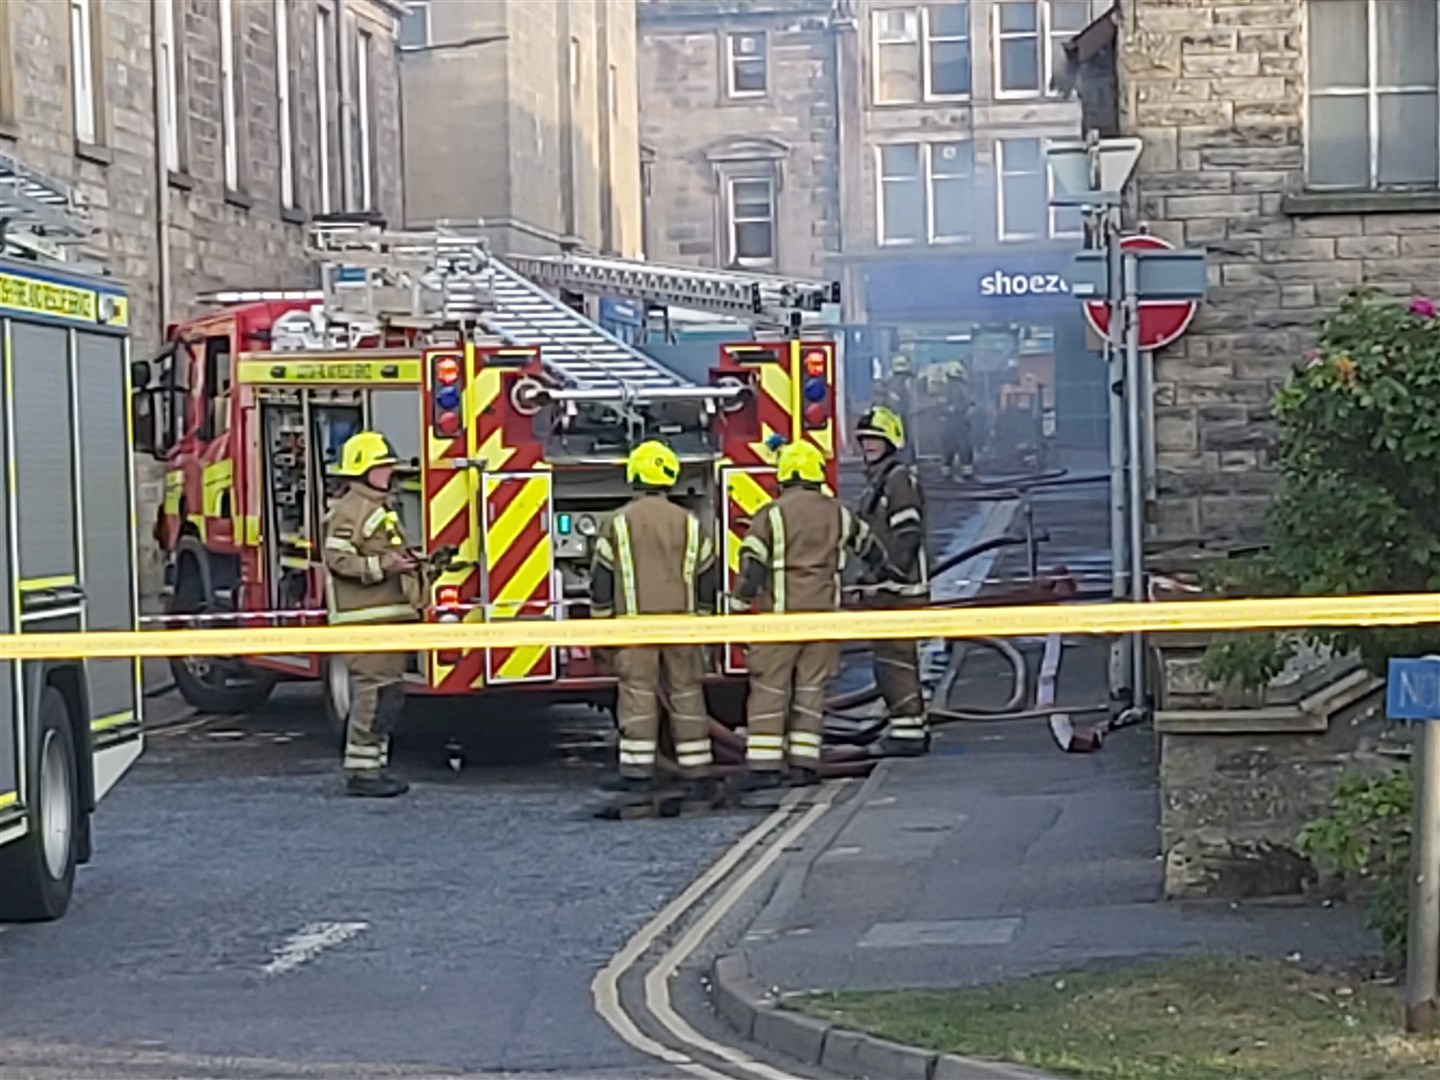 The scene last Friday as firefighters deal with the blaze and the public kept at a safe distance with a strict cordon. Picture: Highland News and Media